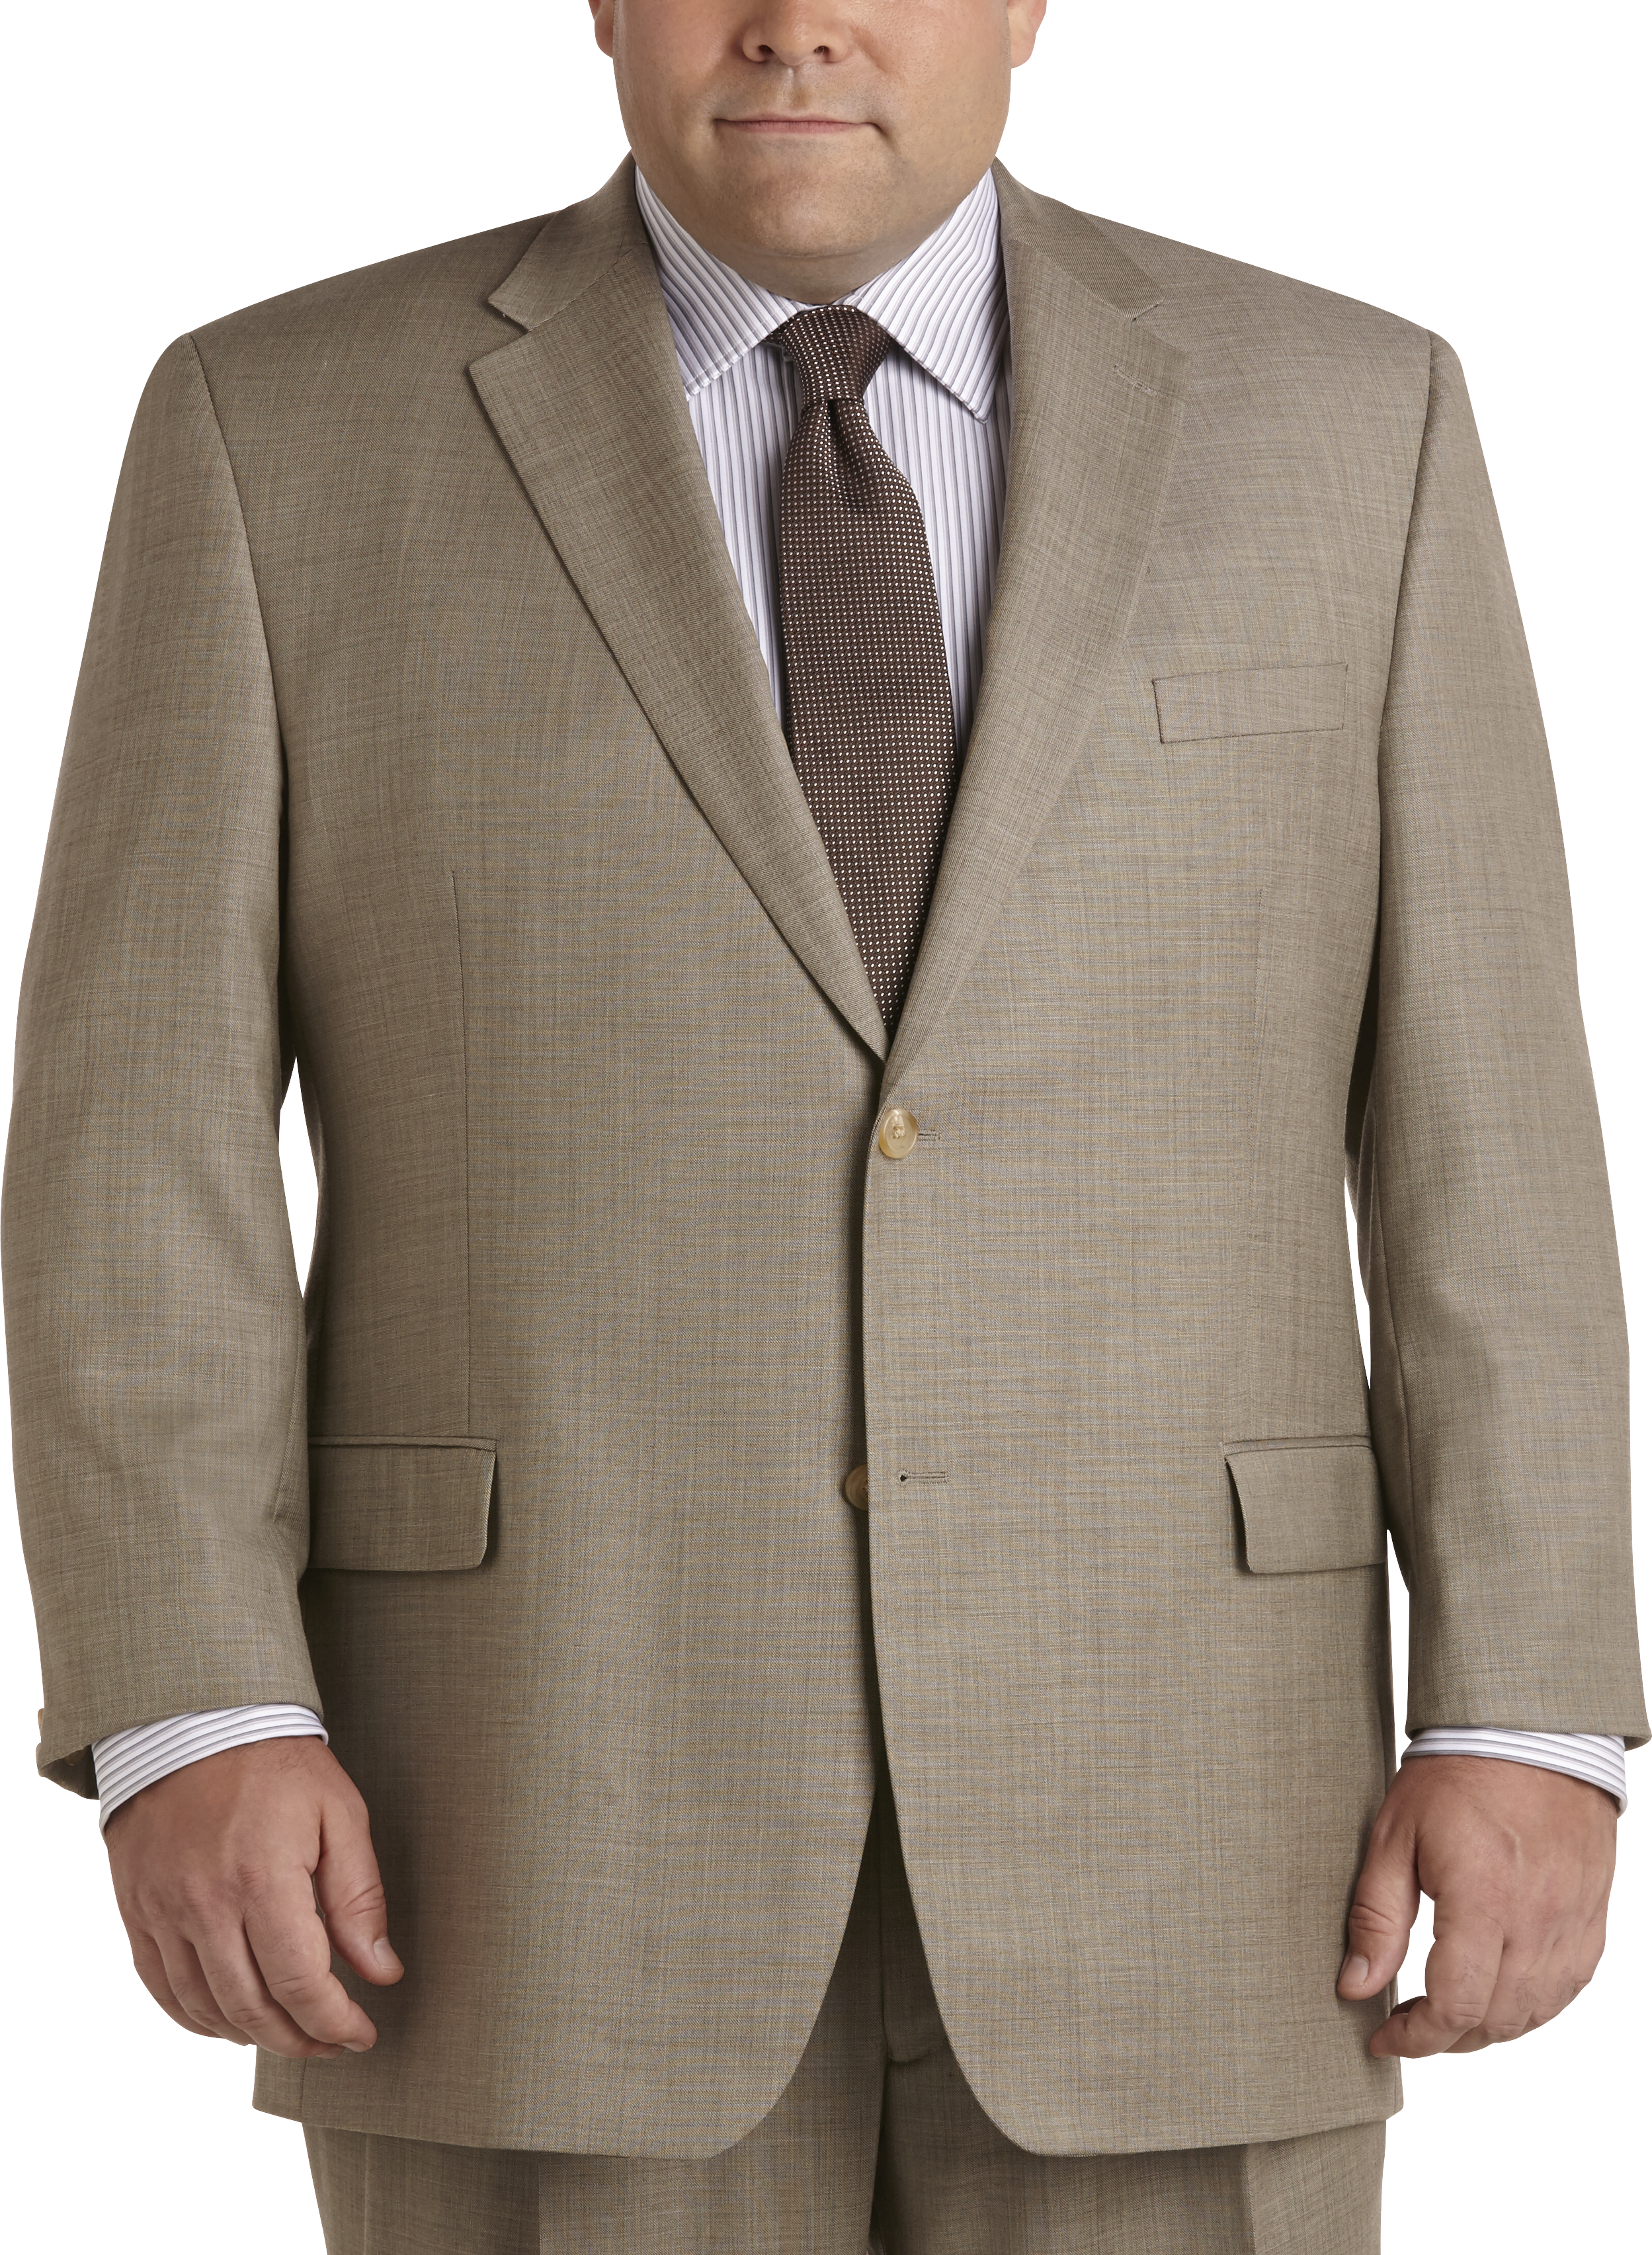 Portly Suits for Men | Men's Wearhouse